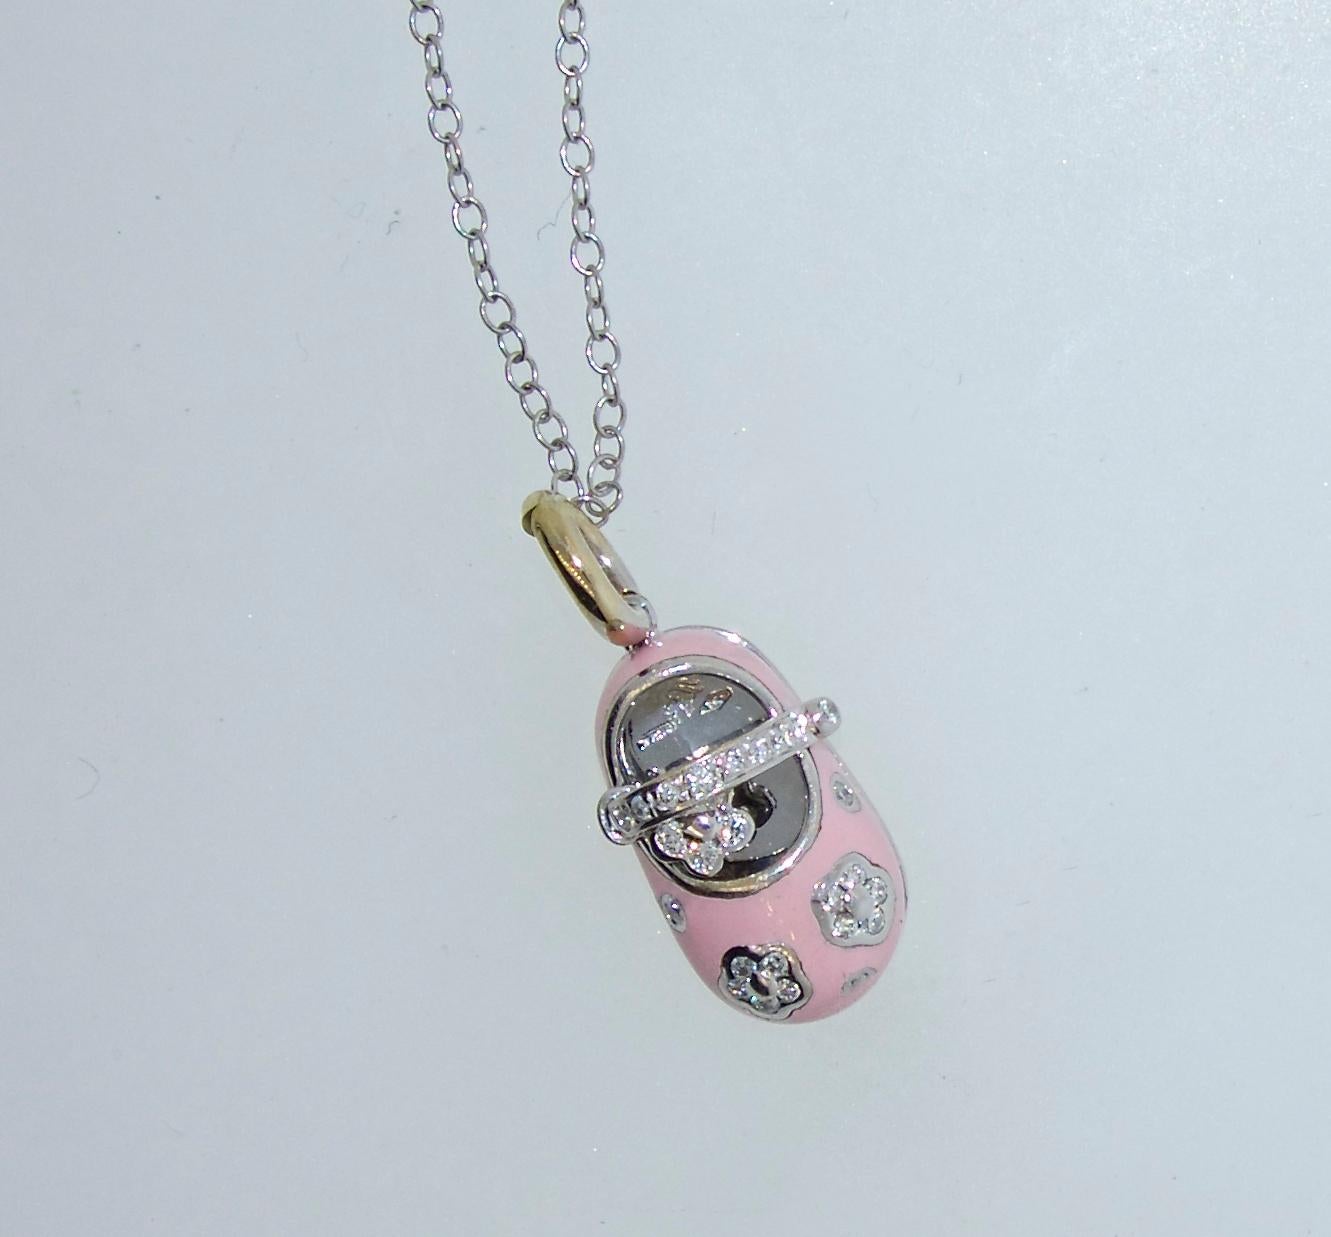 New condition, probably not worn, this pendant on a white gold chain is pink enamel and decorated with white (H,VS1) diamonds, the baby shoe is one inch by .5 inches.
